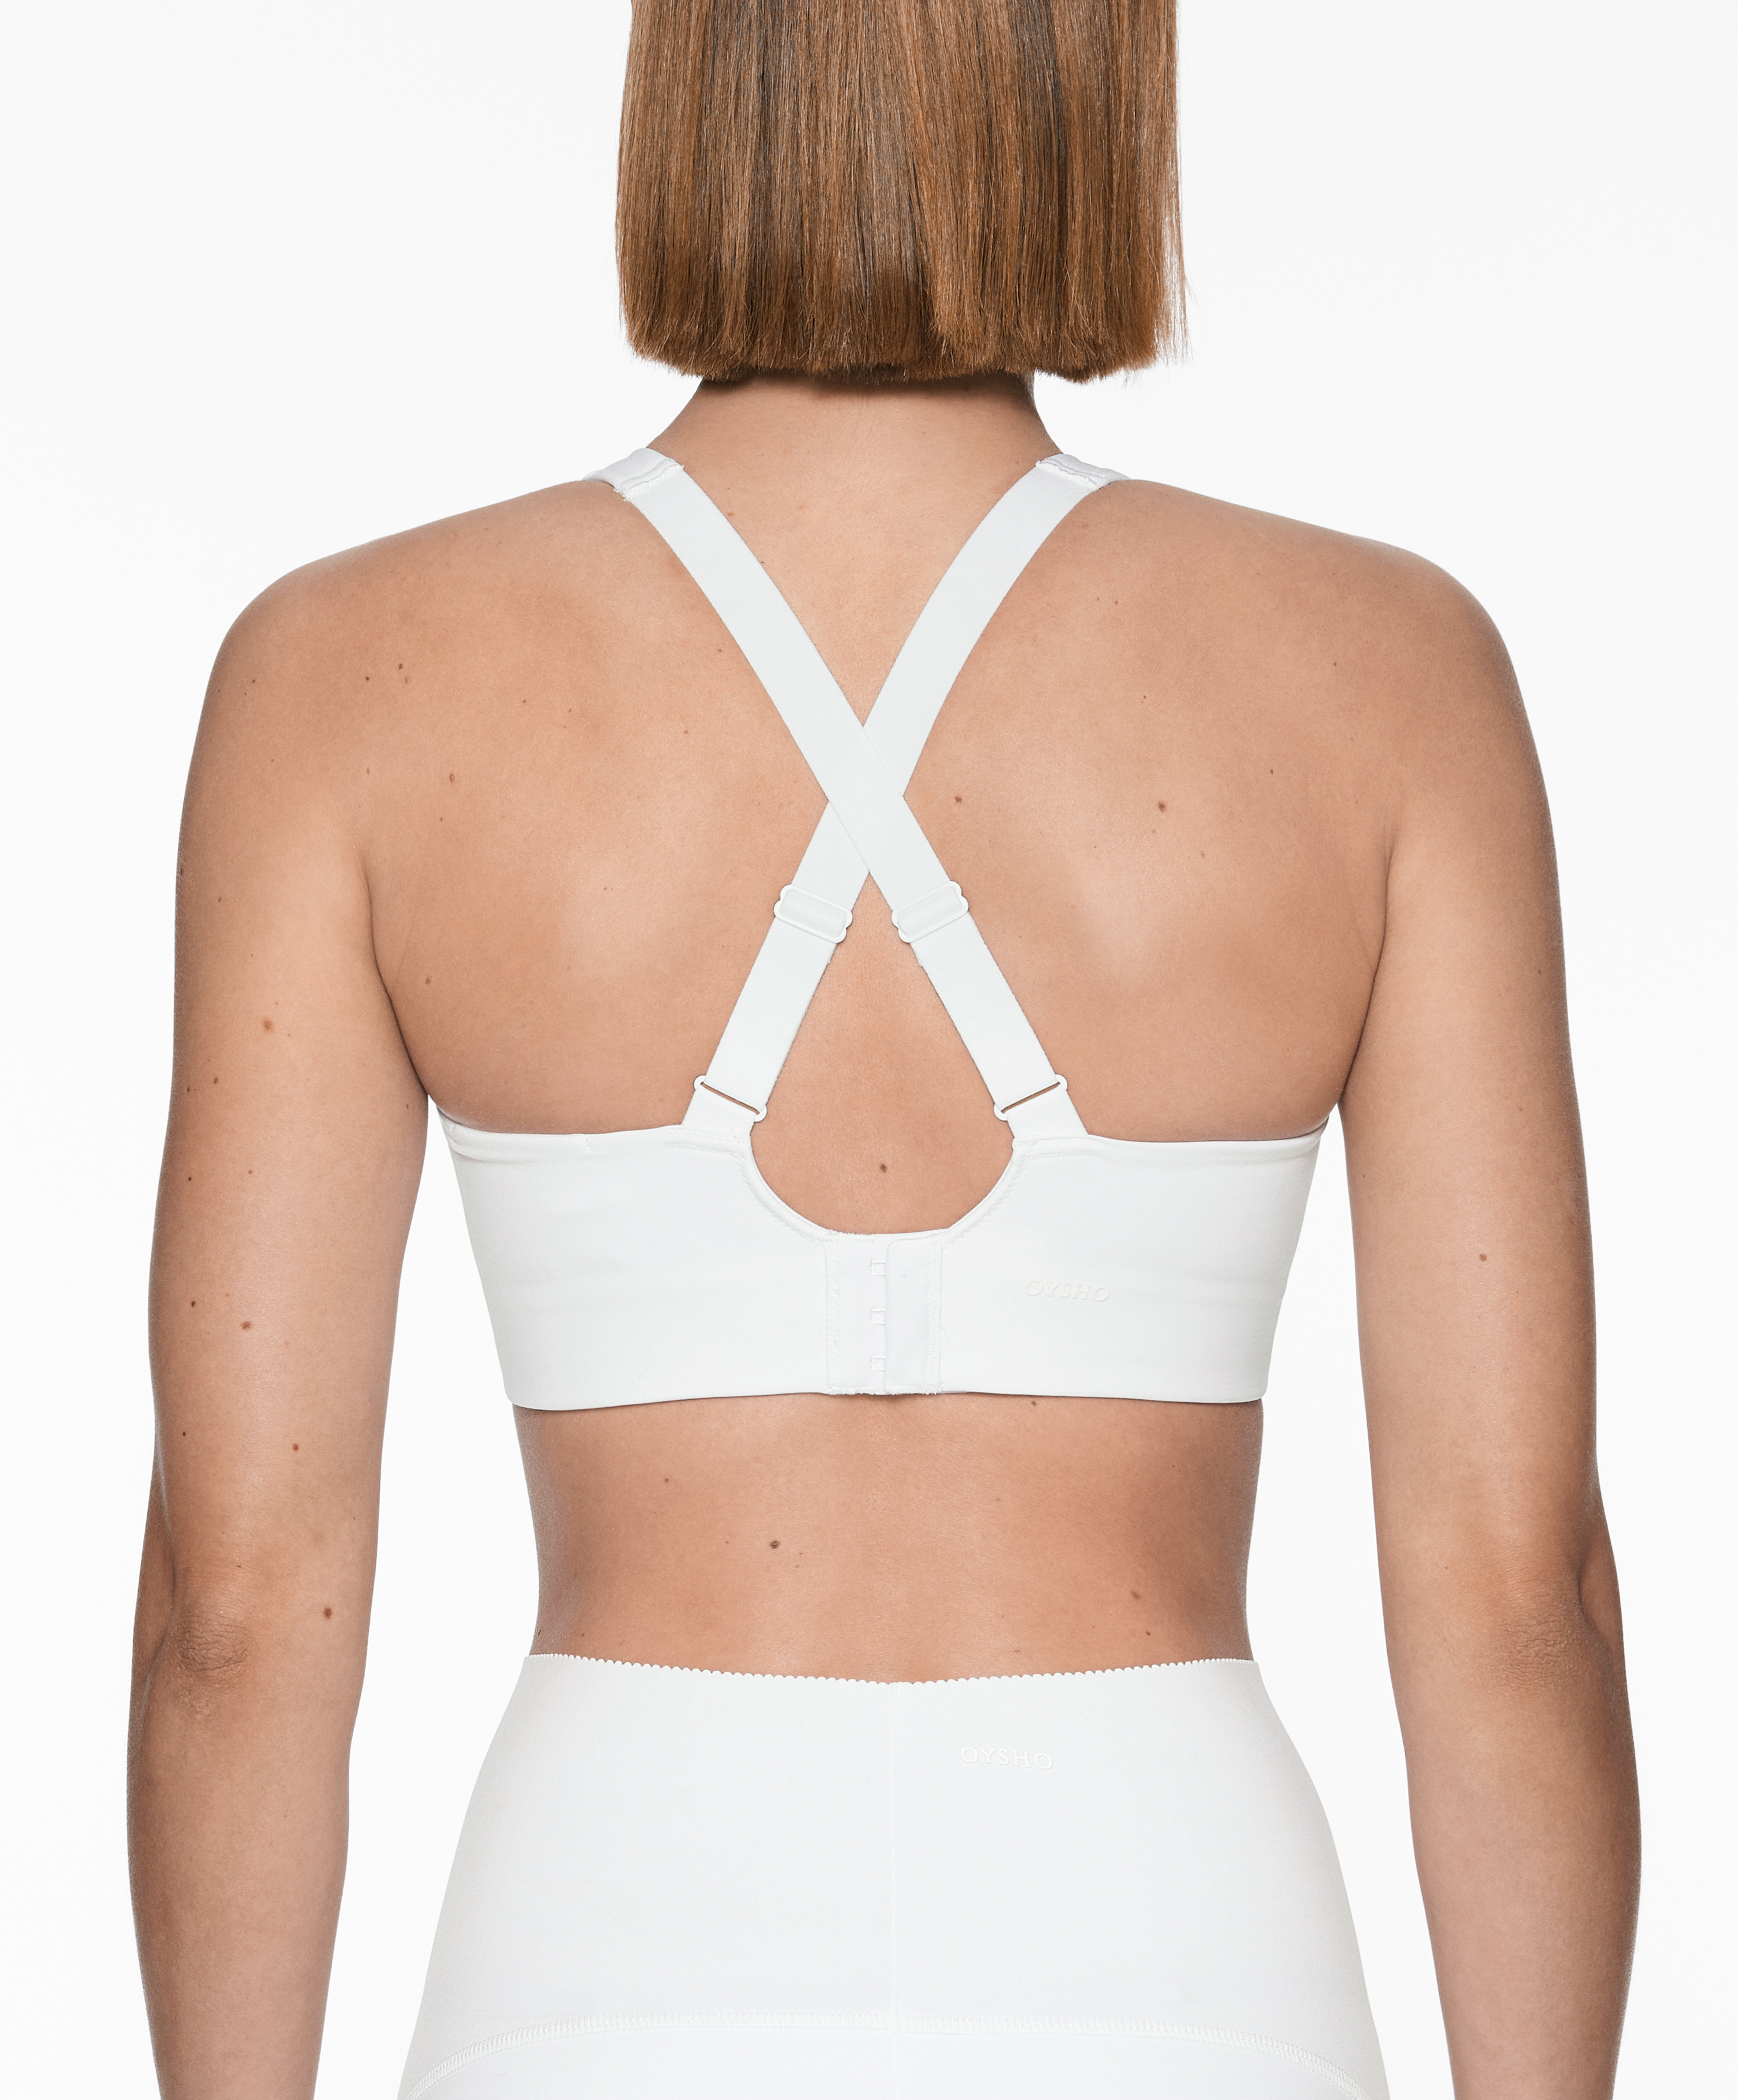 sports bras with high support